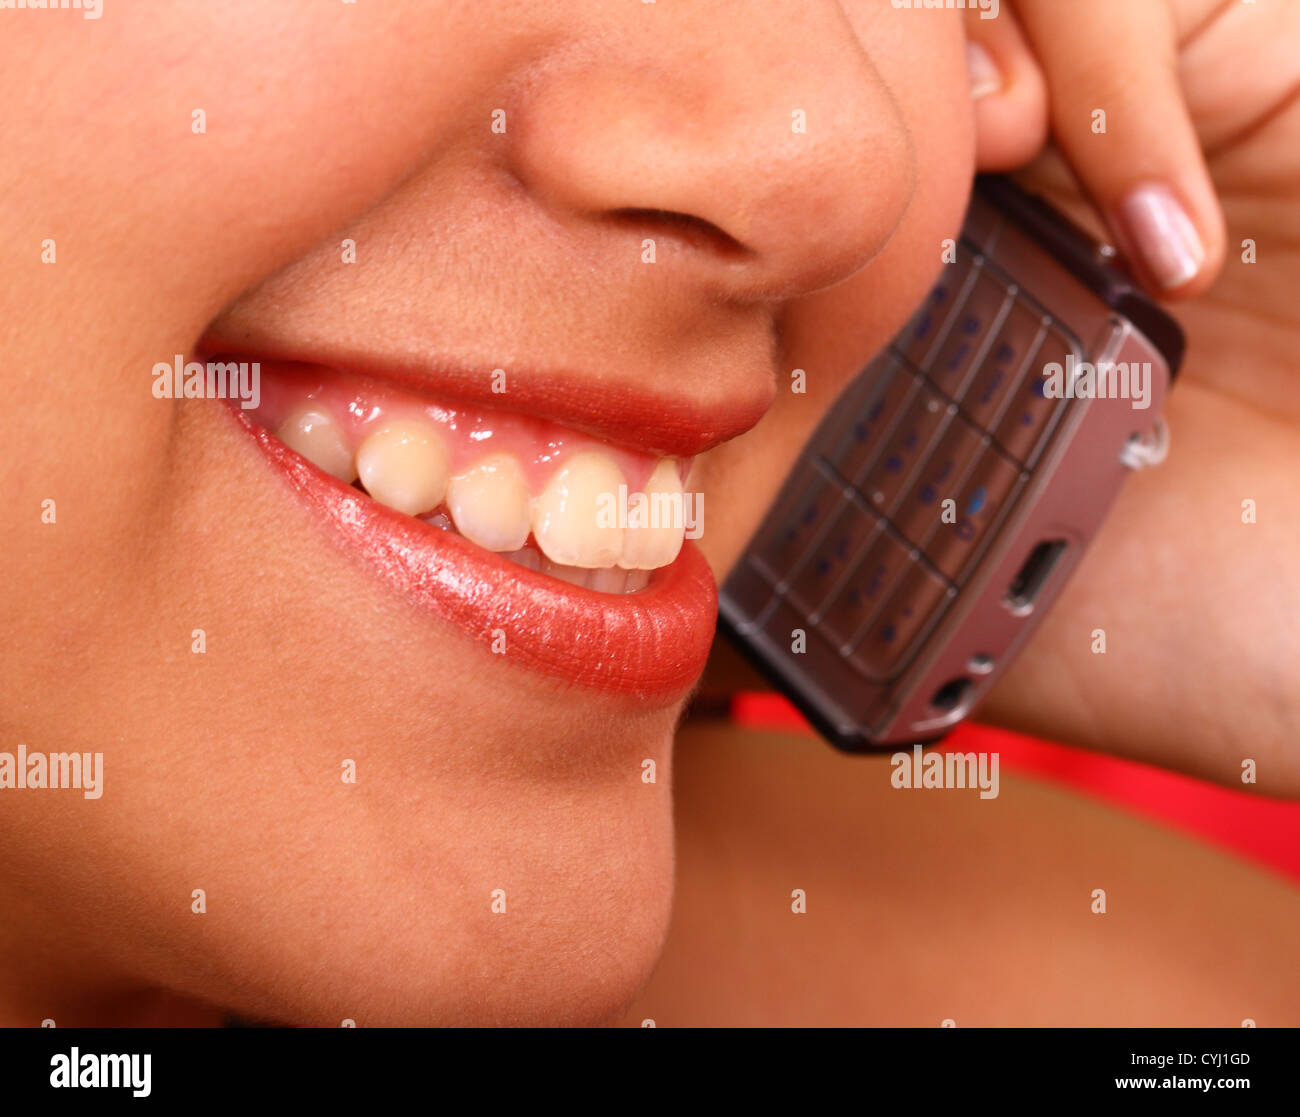 Happy Girl Making A Telephone Call To Her Friend Stock Photo